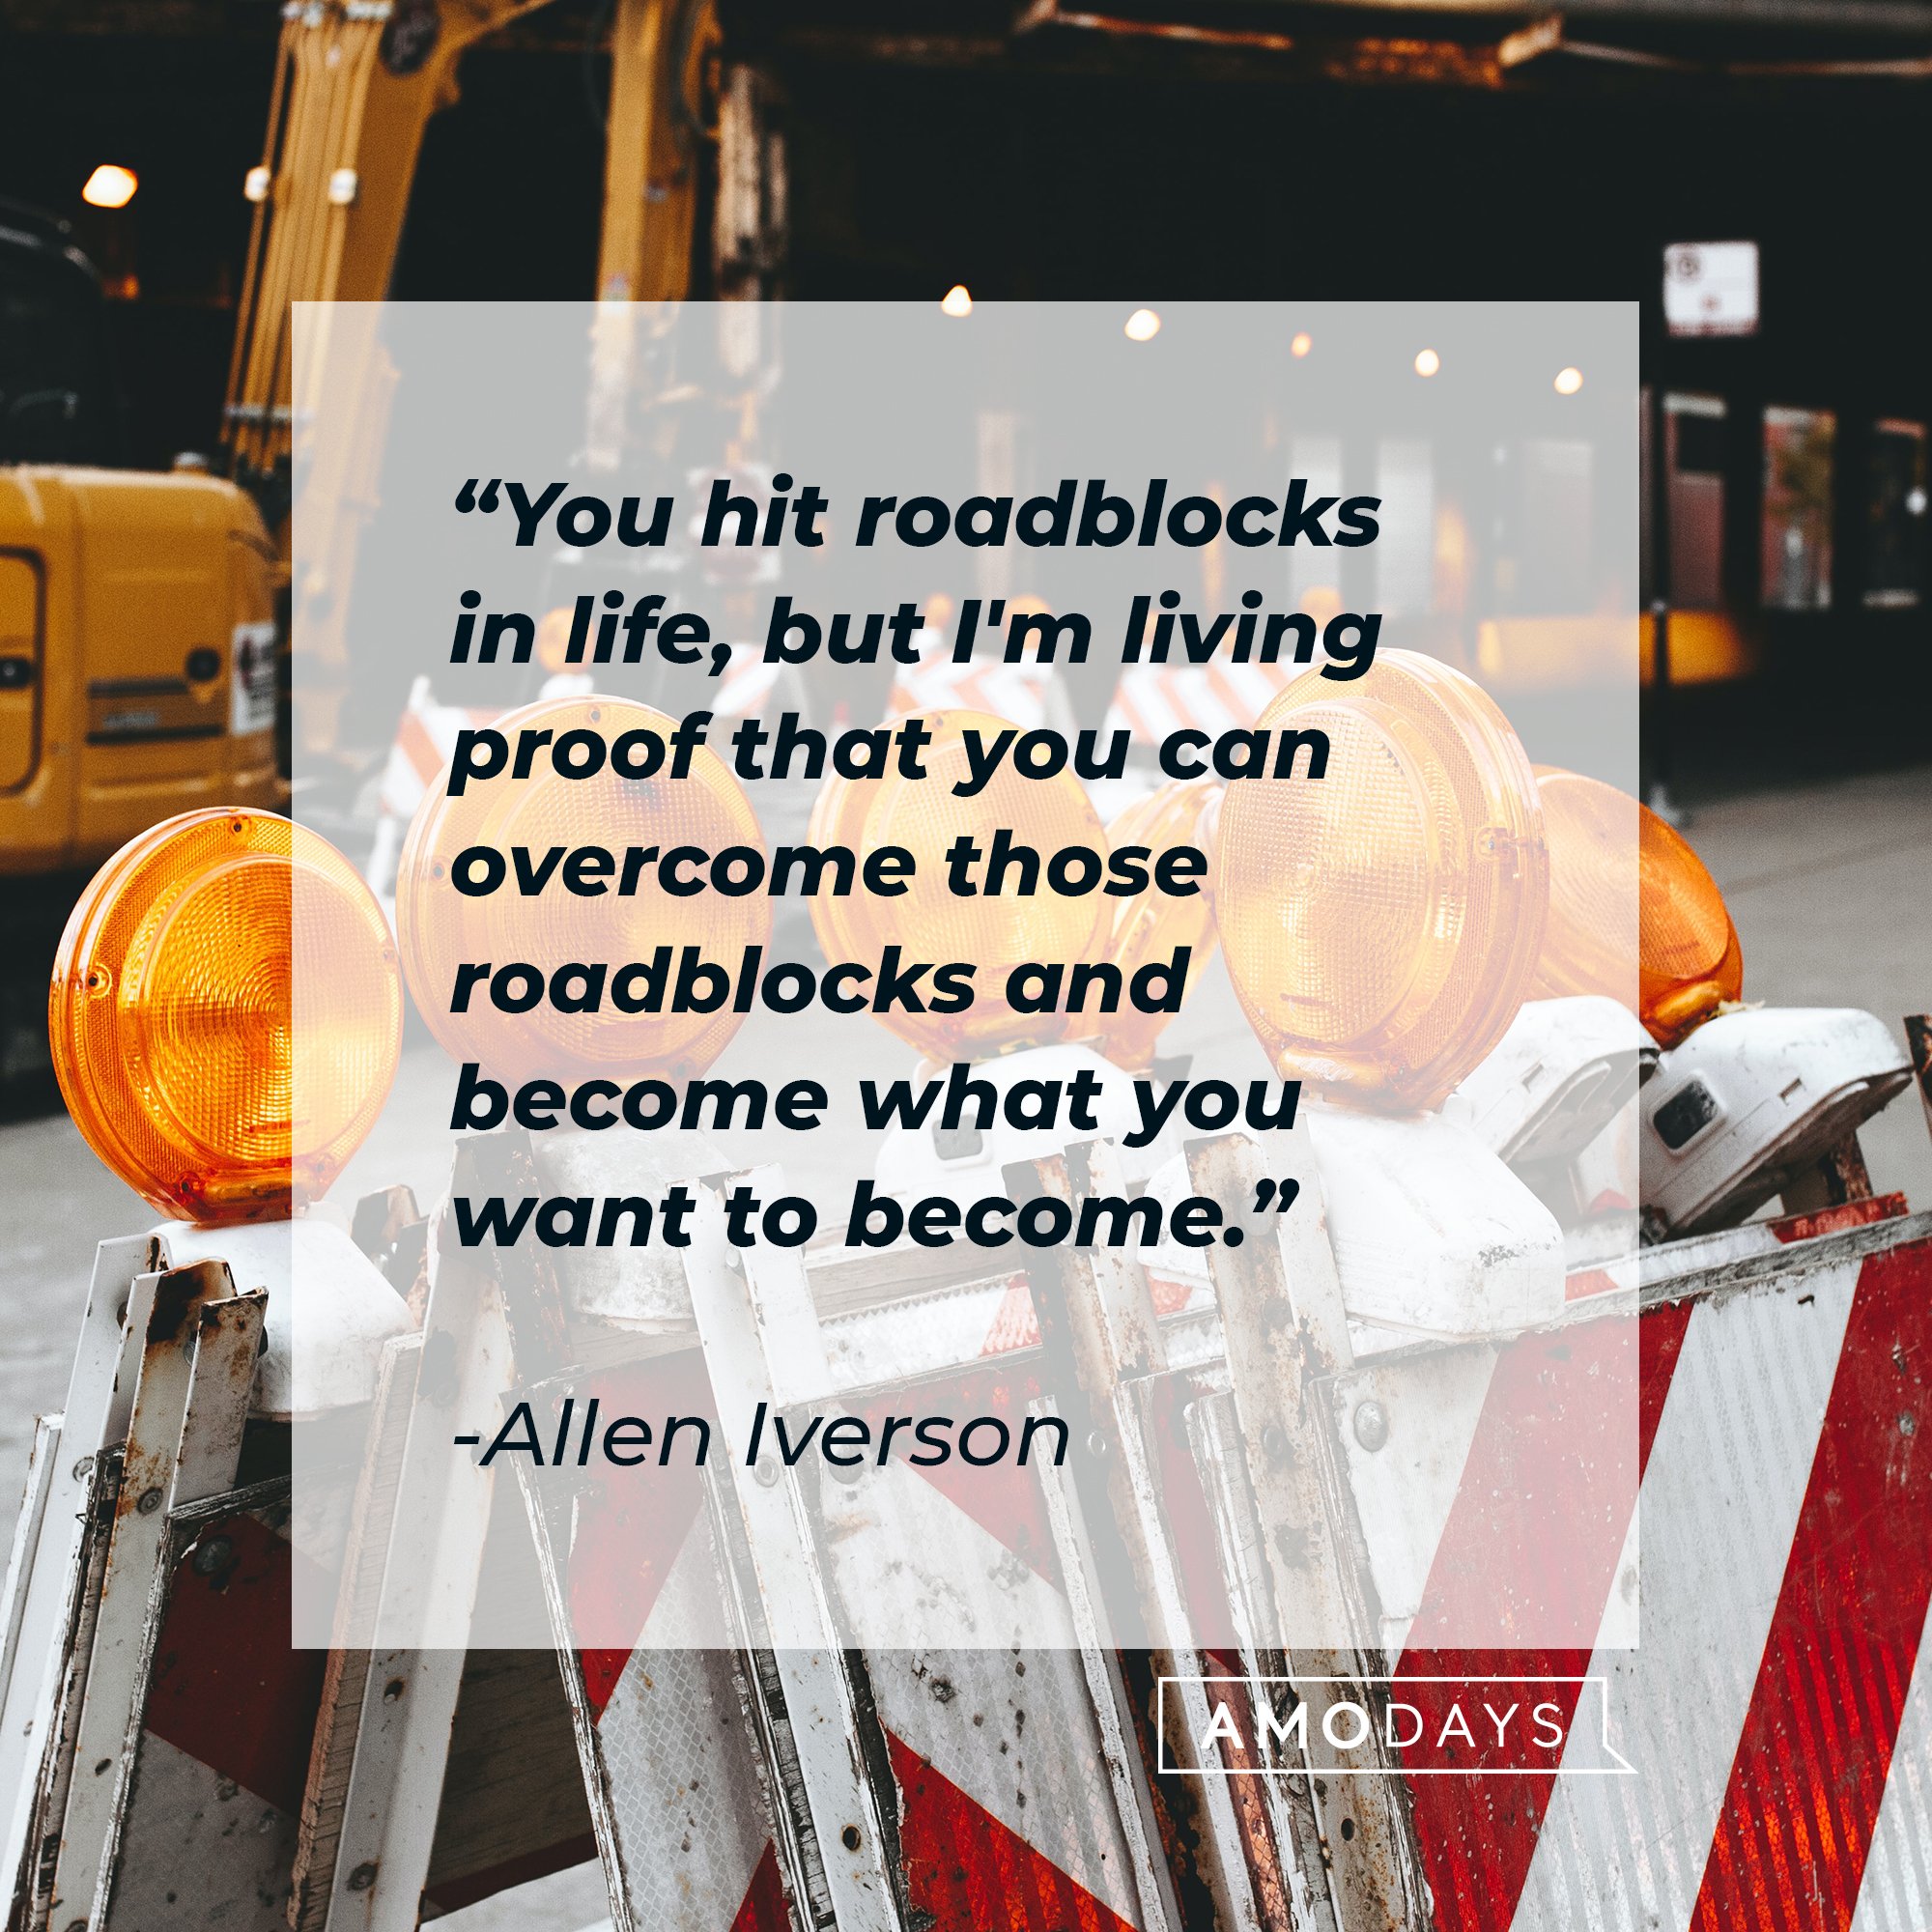 Allen Iverson's quote: "You hit roadblocks in life, but I'm living proof that you can overcome those roadblocks and become what you want to become."  | Image: AmoDays